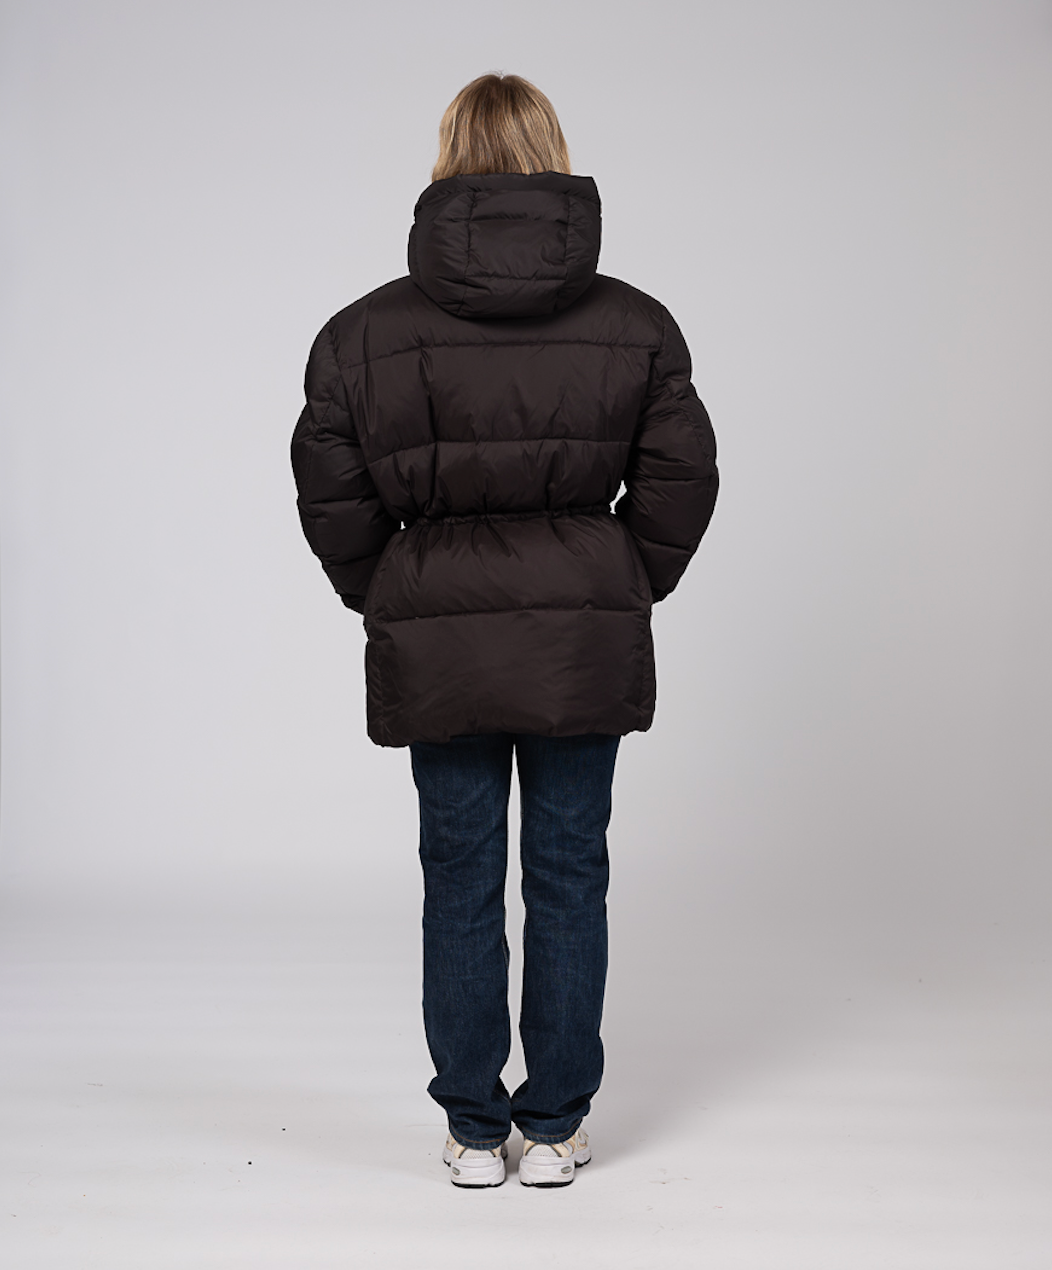 Up Hill hooded down jacket Ultra light Clermonte